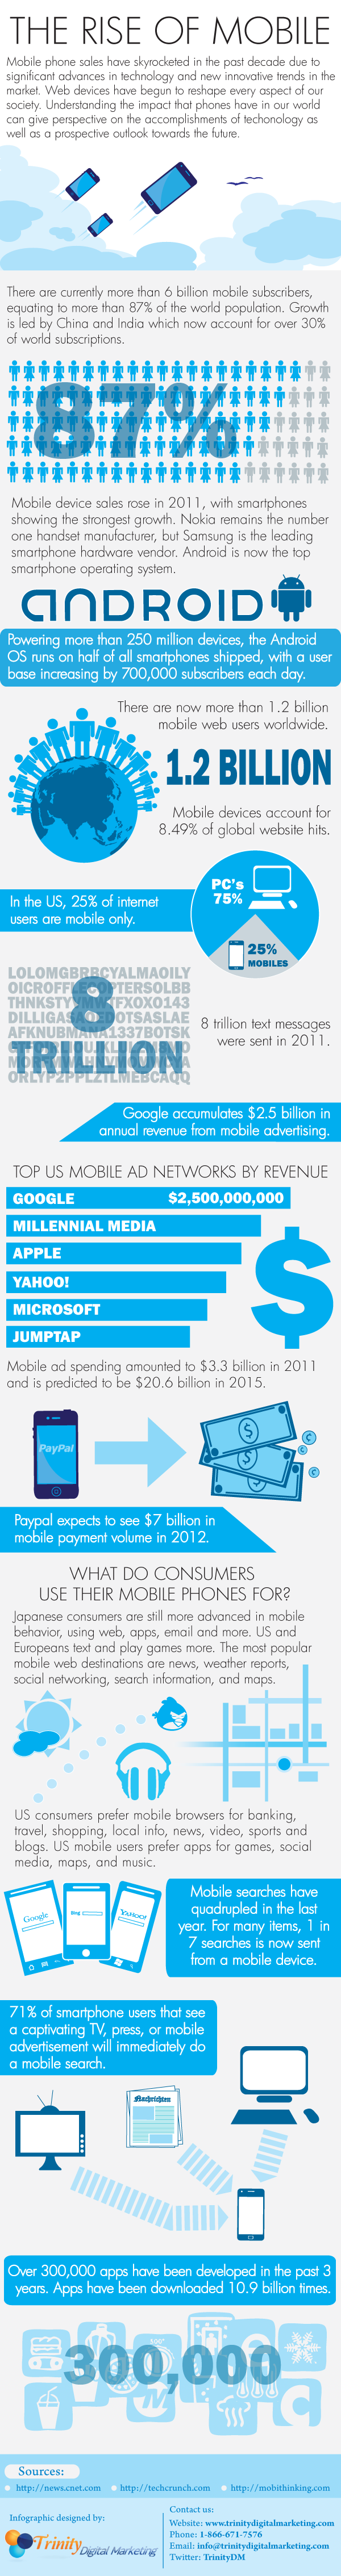 the rise of mobile infographic